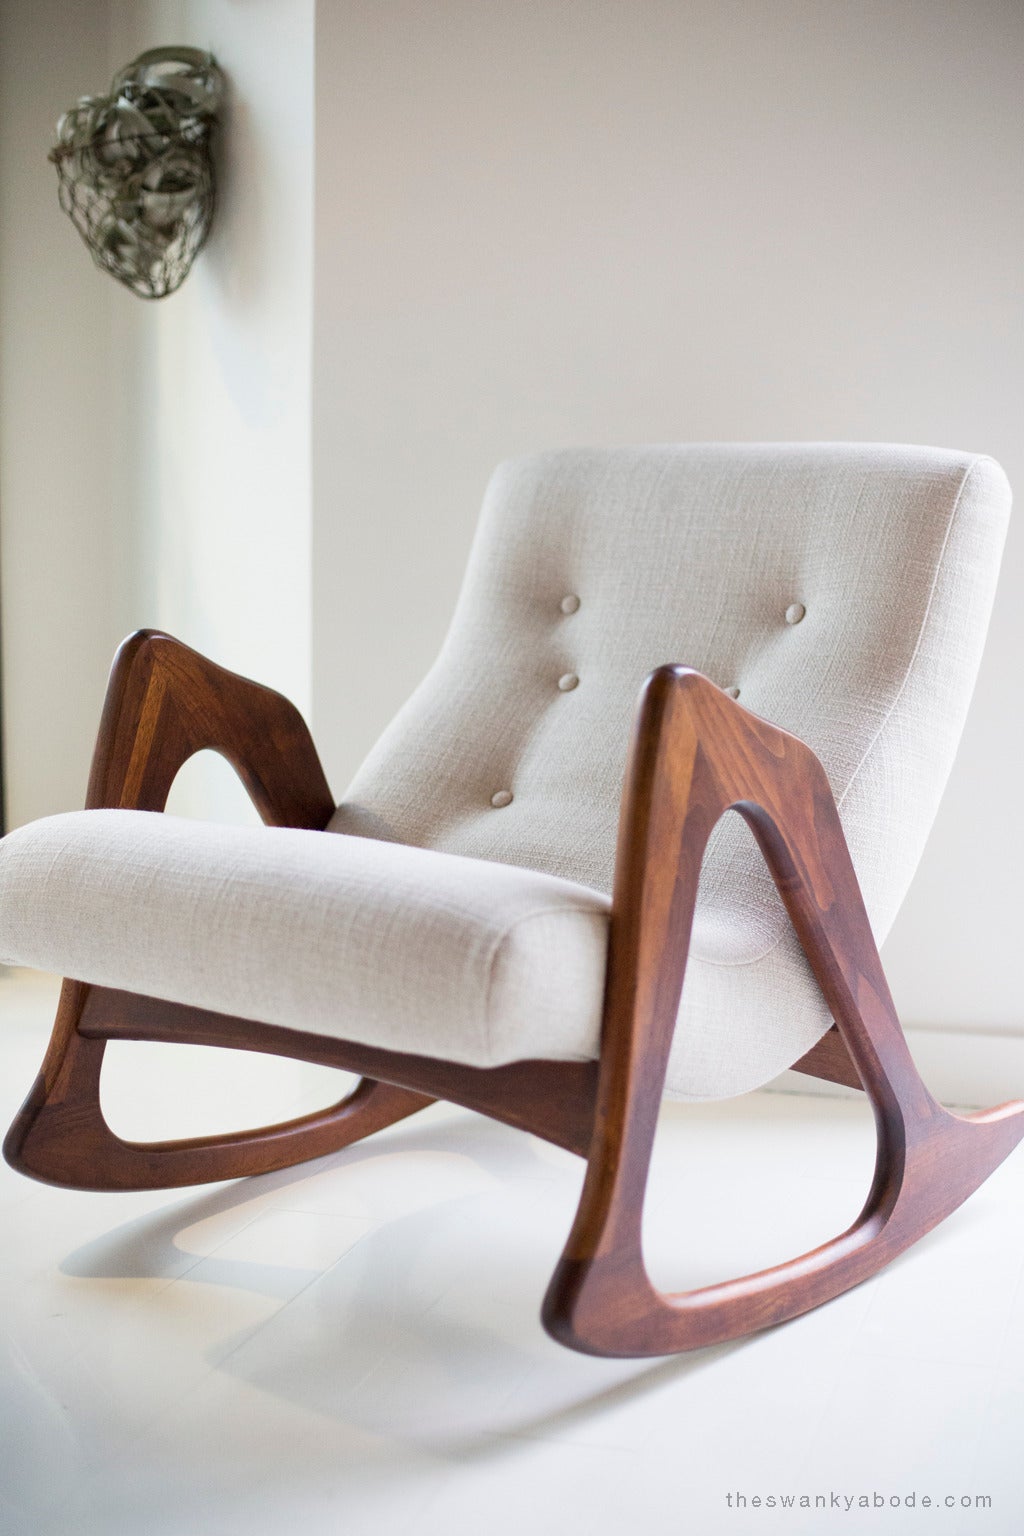 Mid-20th Century Adrian Pearsall Rocking Chair for Craft Associates